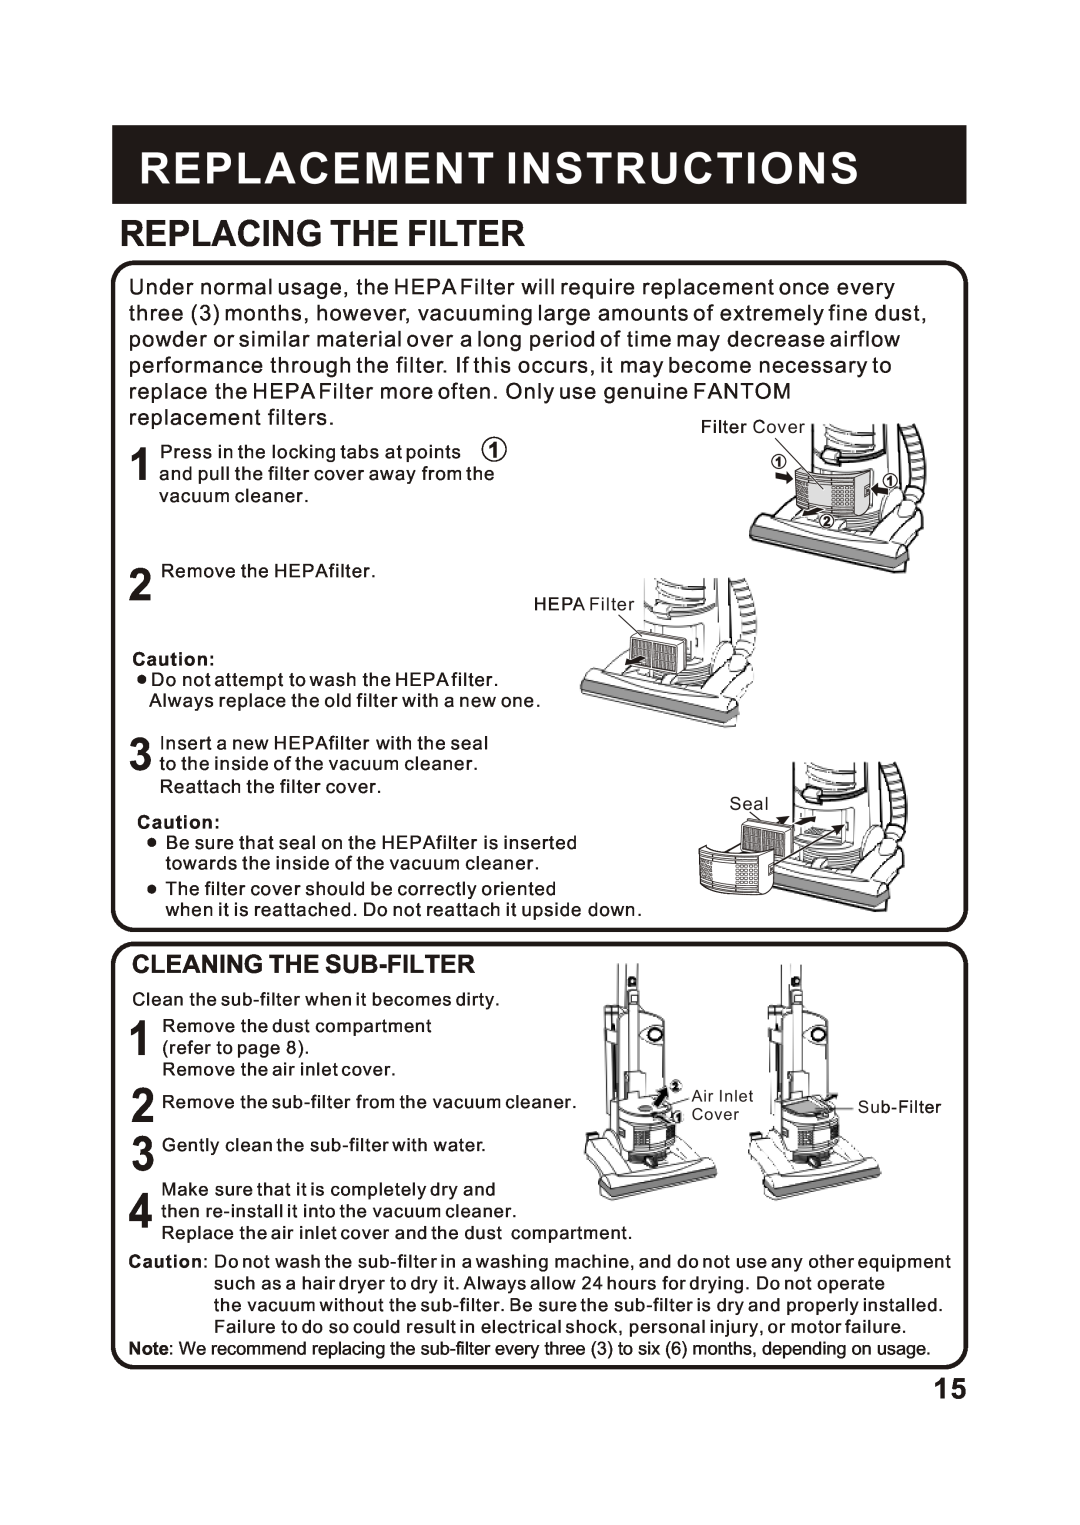 Fantom Vacuum FM743H instruction manual Replacing The Filter, Cleaning The Sub-Filter, Replacement Instructions 